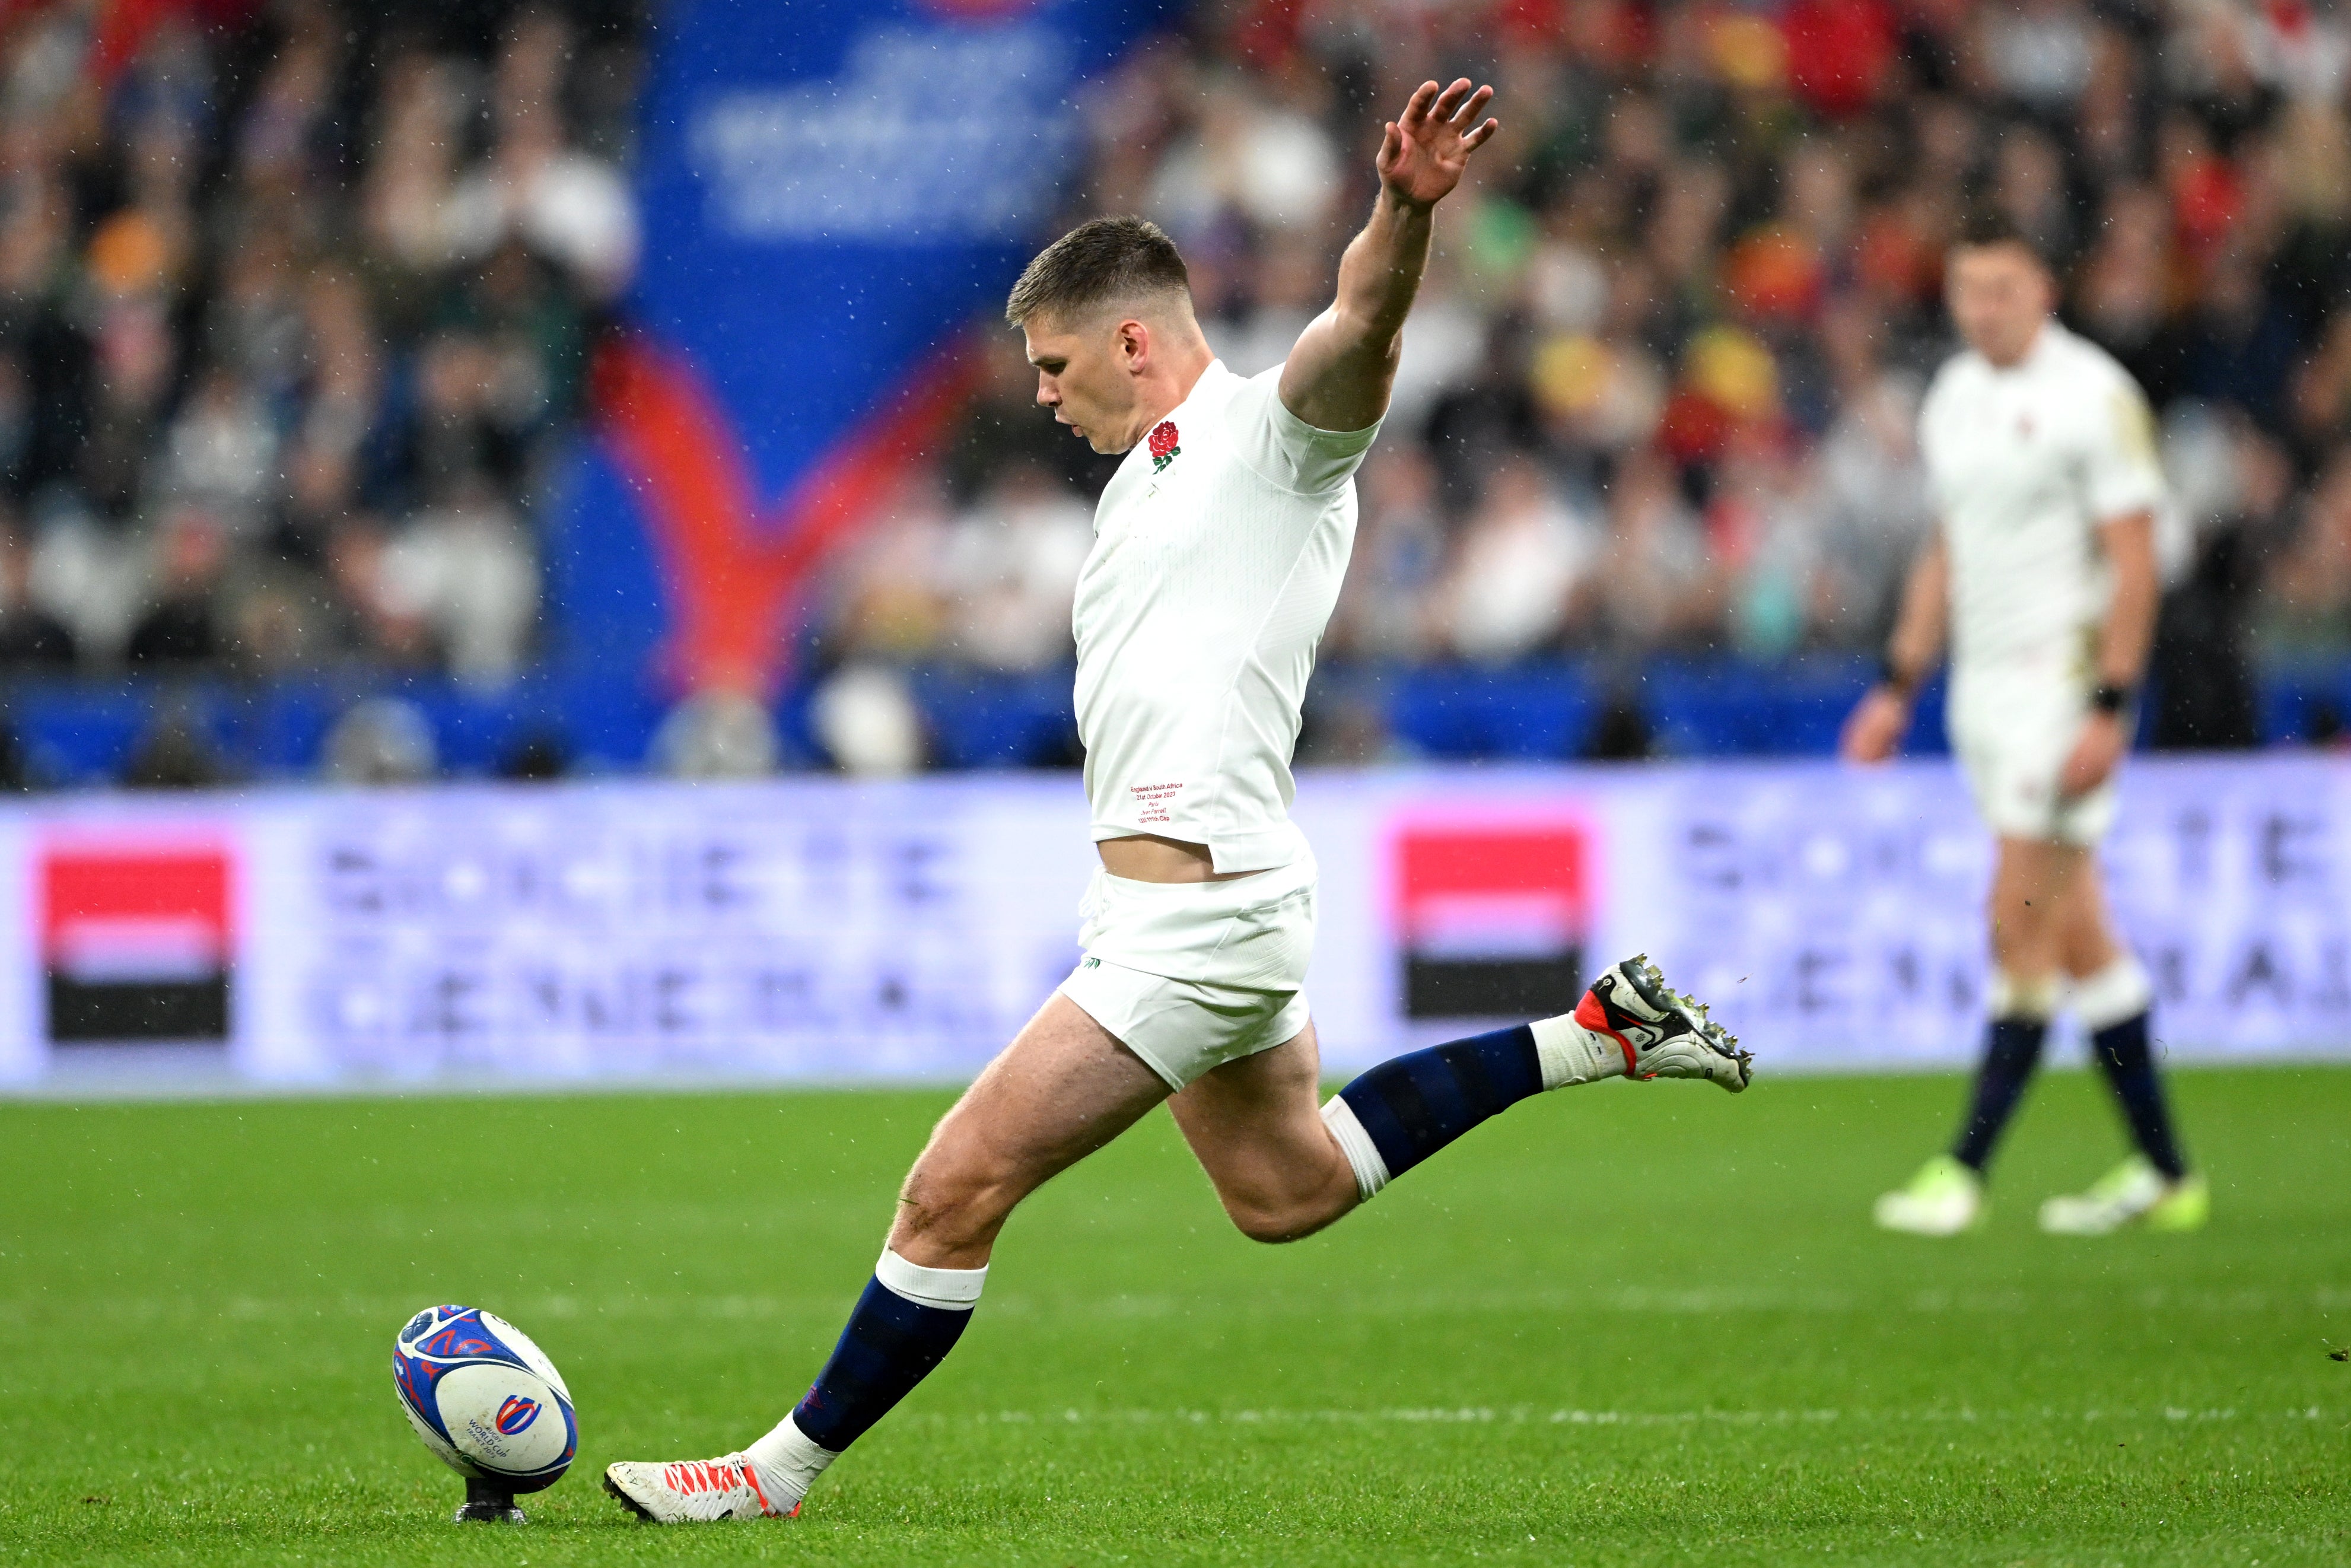 Farrell kicks another England penalty in a near-perfect first half